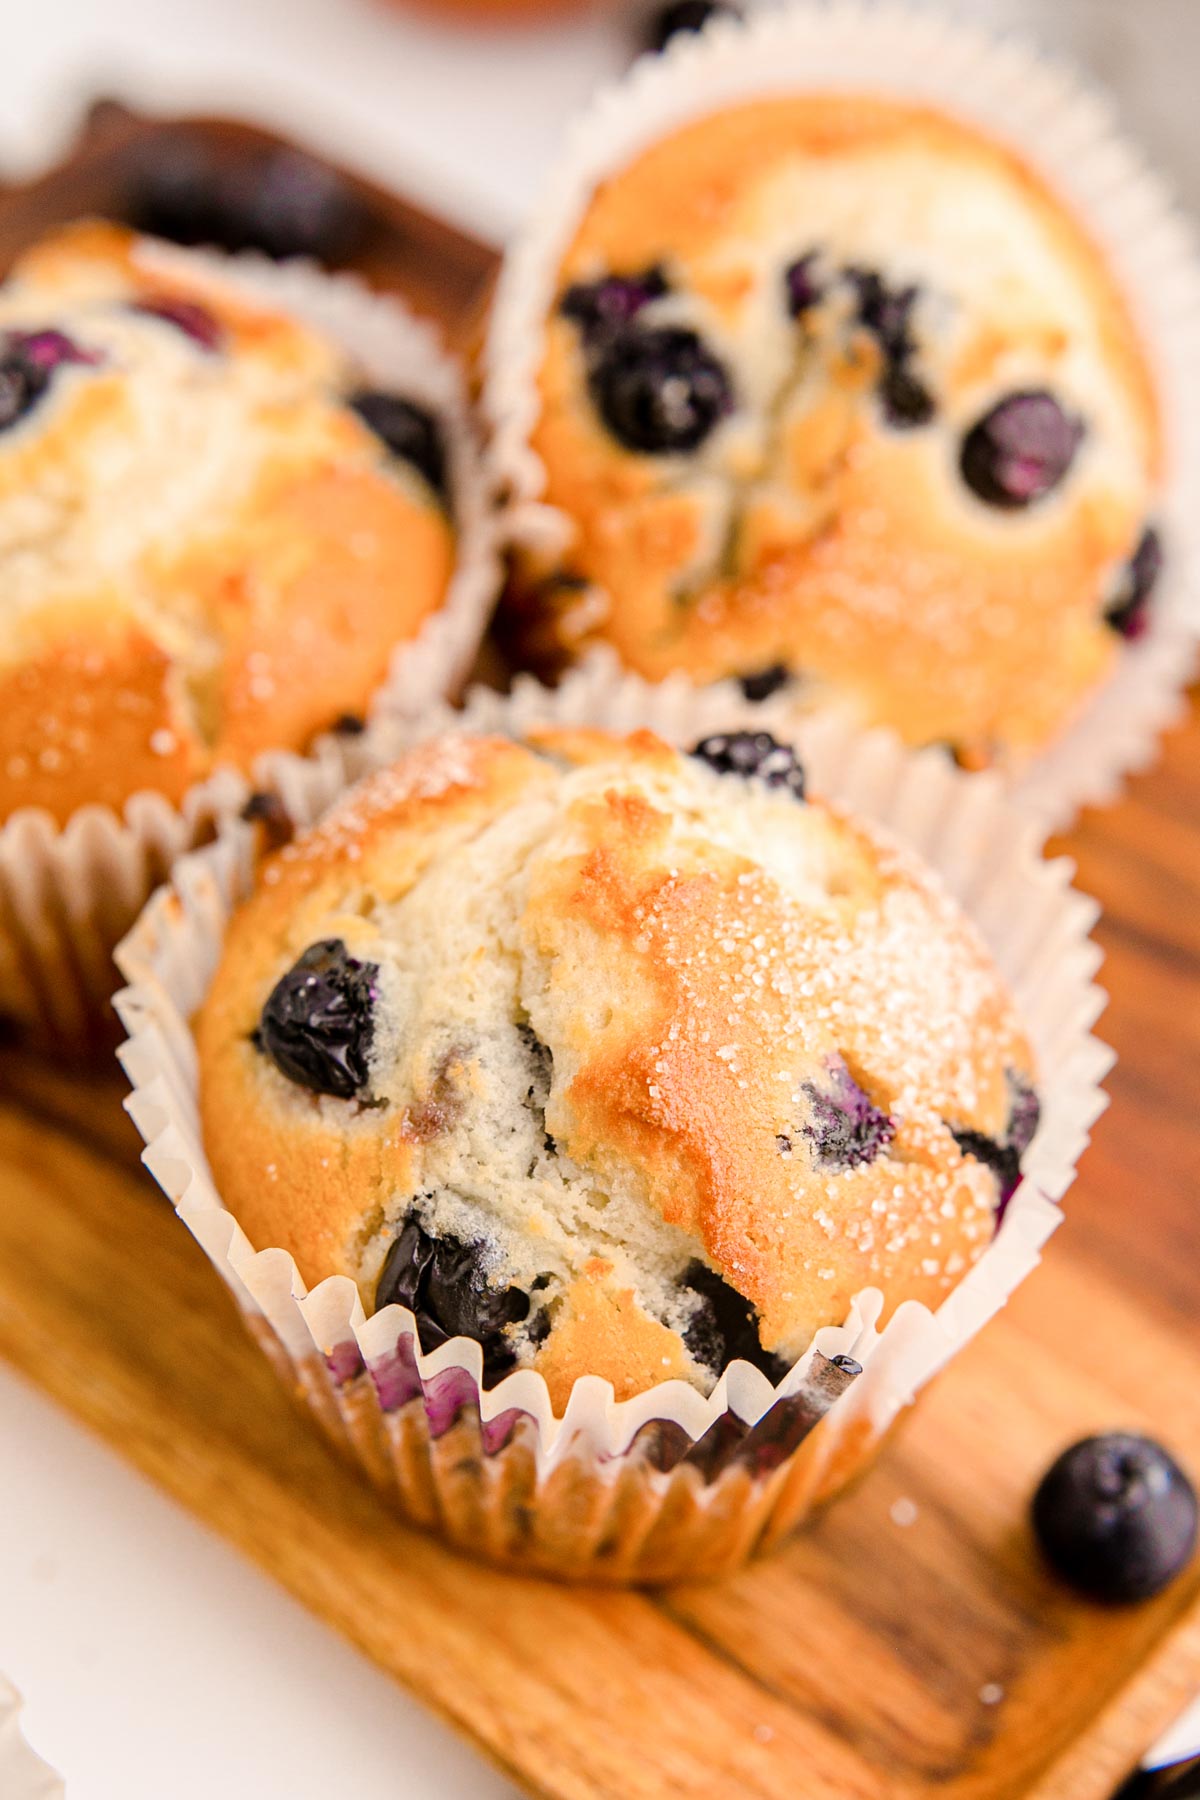 Cake Mix Blueberry Muffins Recipe - By Kelsey Smith